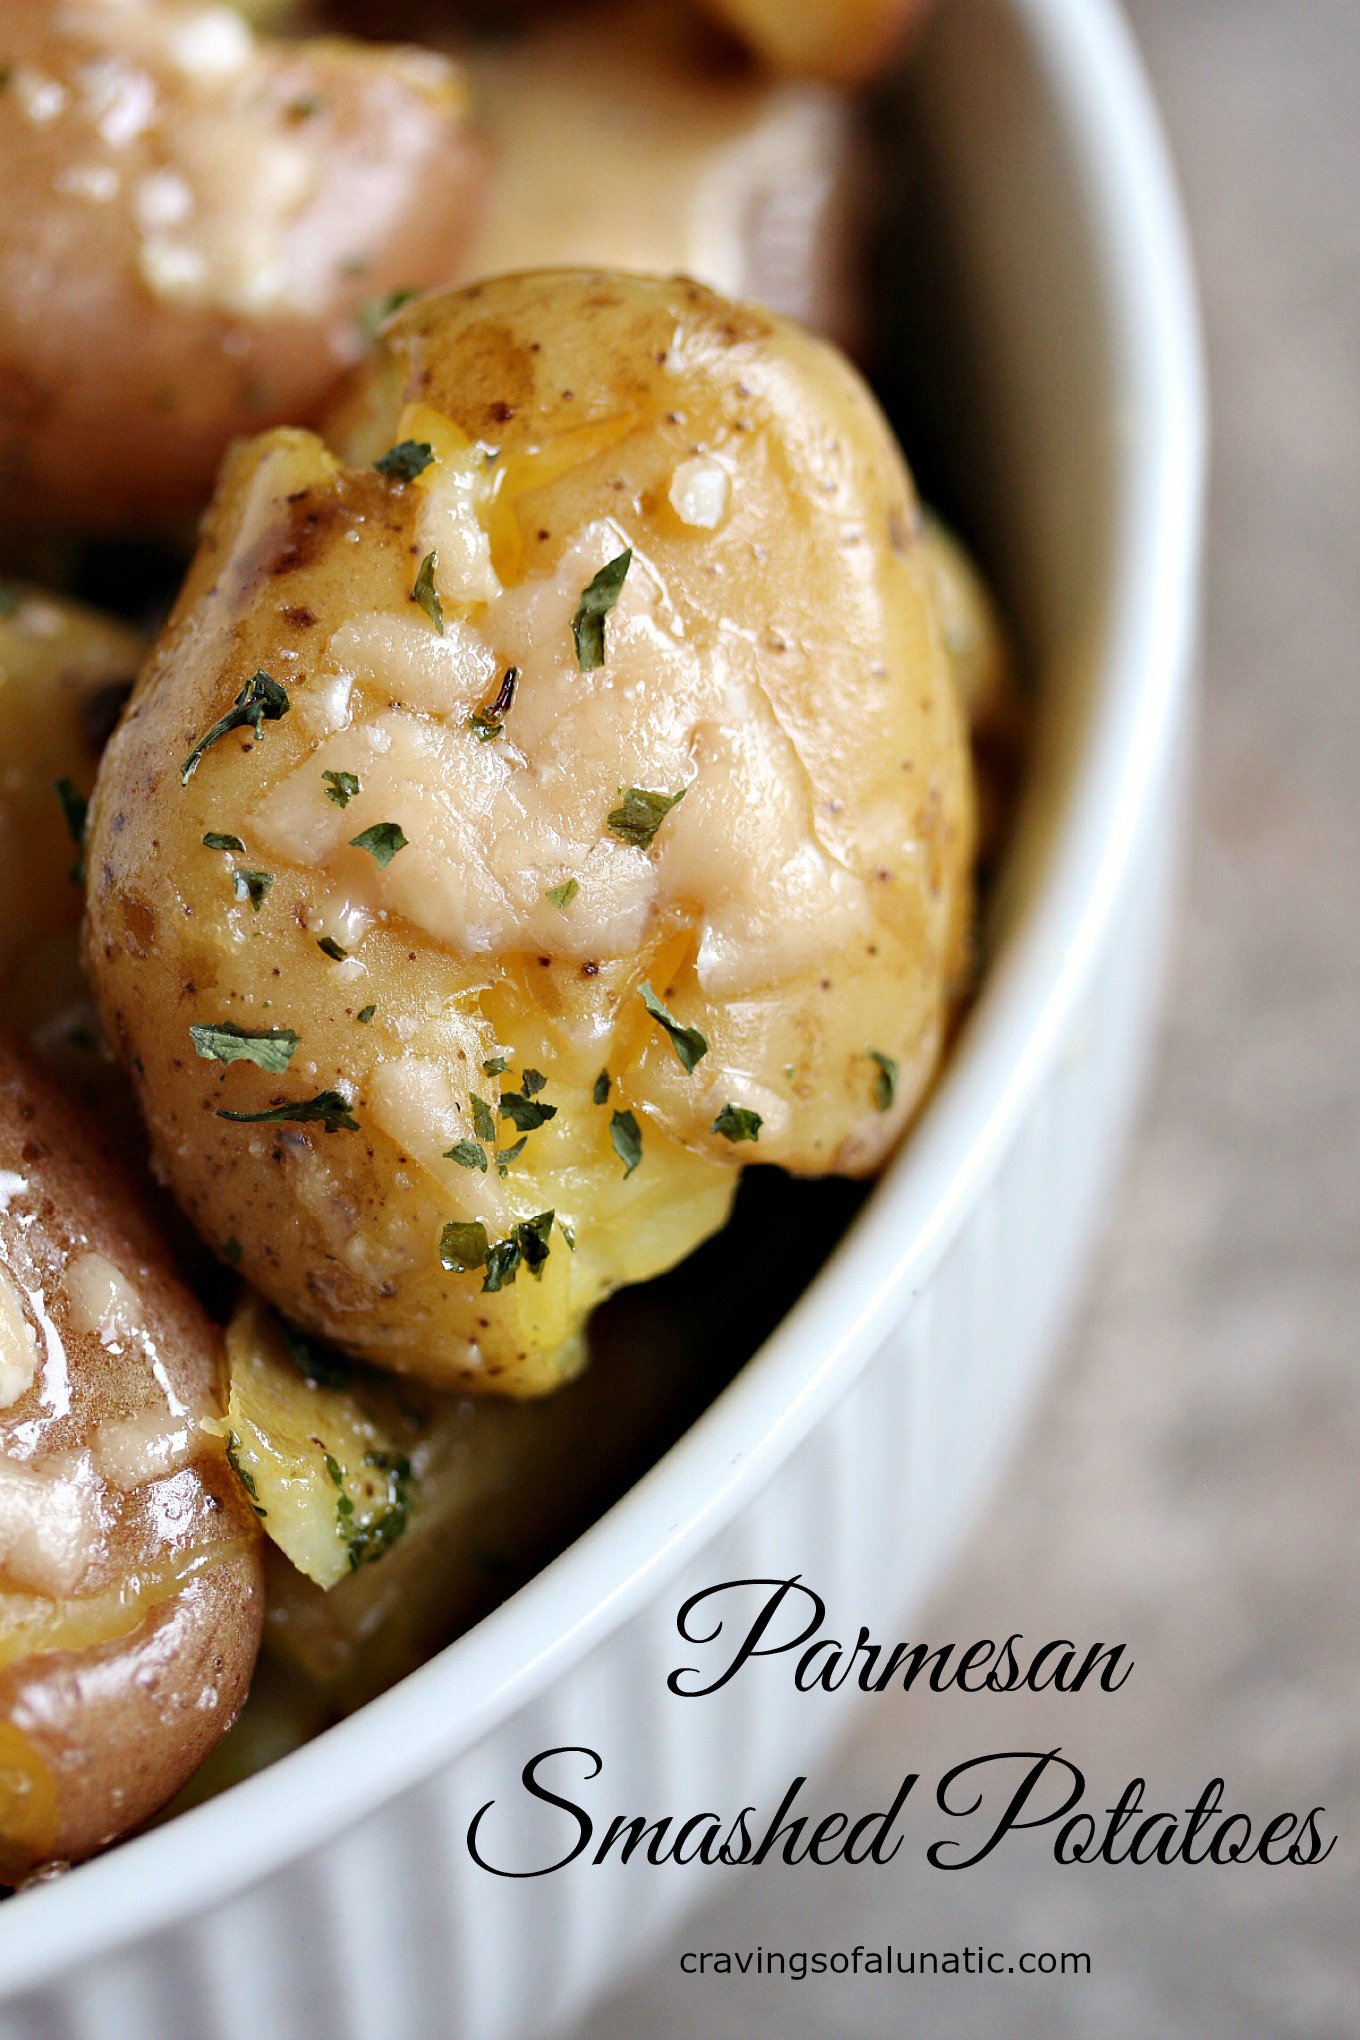 Parmesan Smashed Potatoes from cravingsofalunatic.com- Parmesan smashed potatoes are a family favourite in our household. They're a great alternative to mashed potatoes for the holidays, or all year long. (@CravingsLunatic)